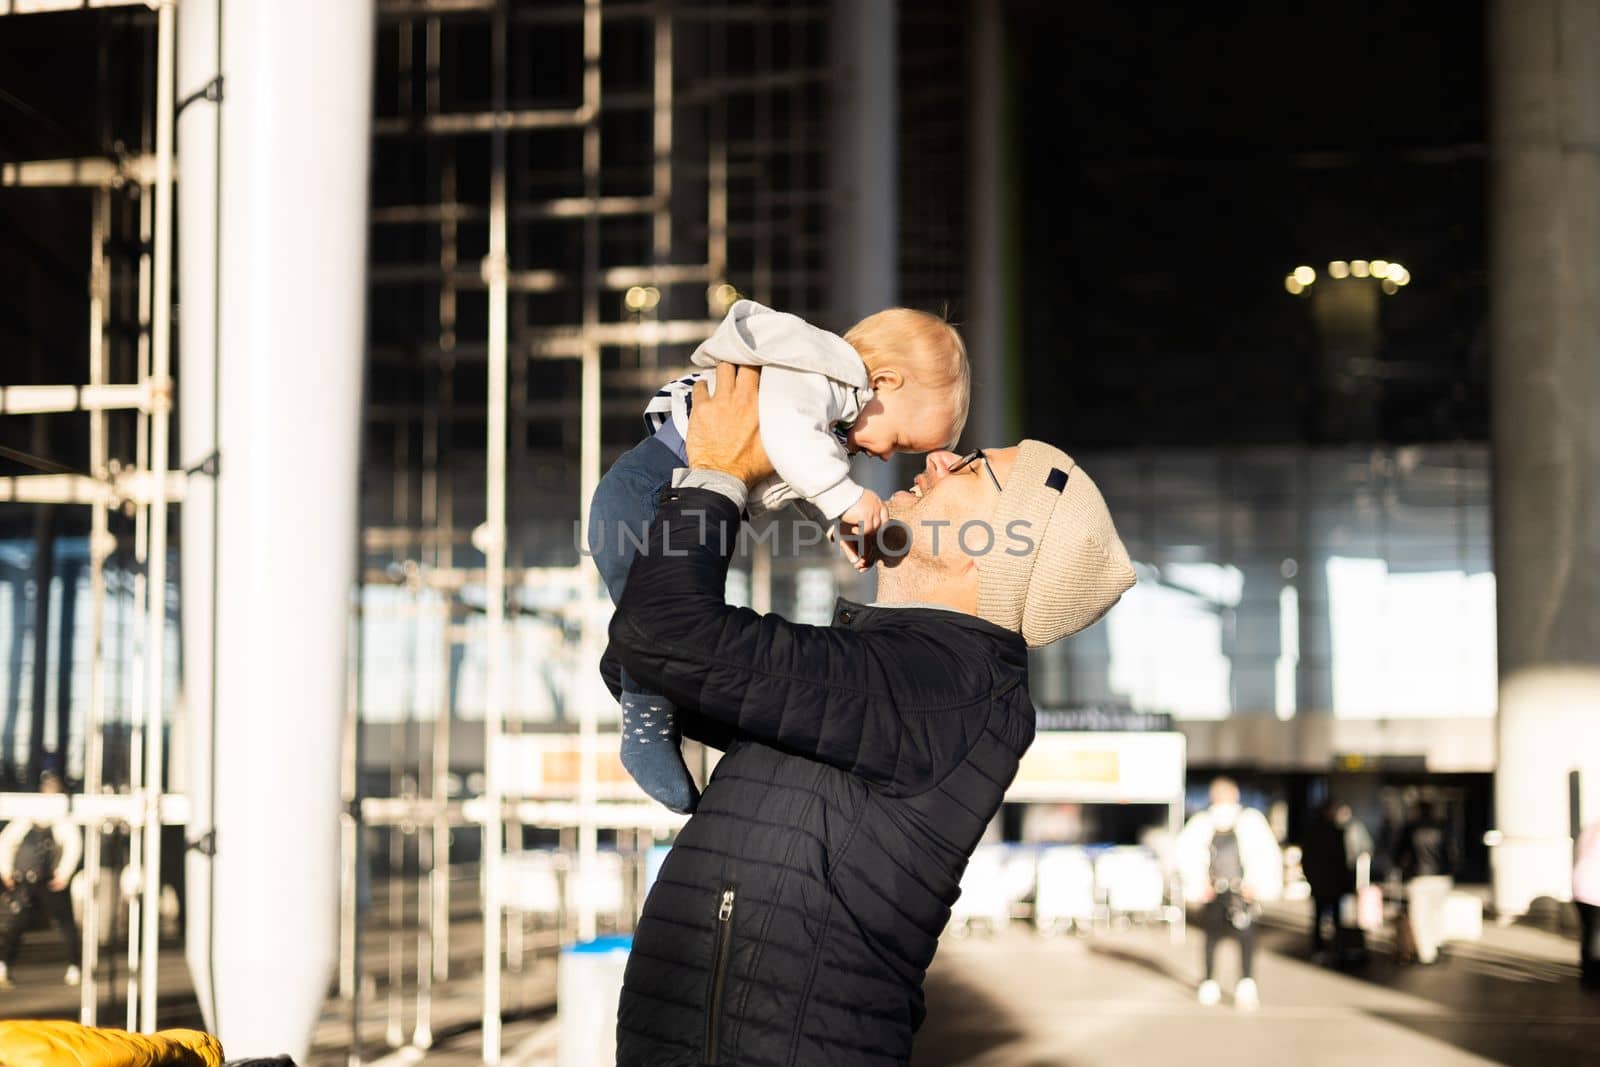 Father happily holding and lifting his infant baby boy child in the air after being rejunited in front of airport terminal station. Baby travel concept